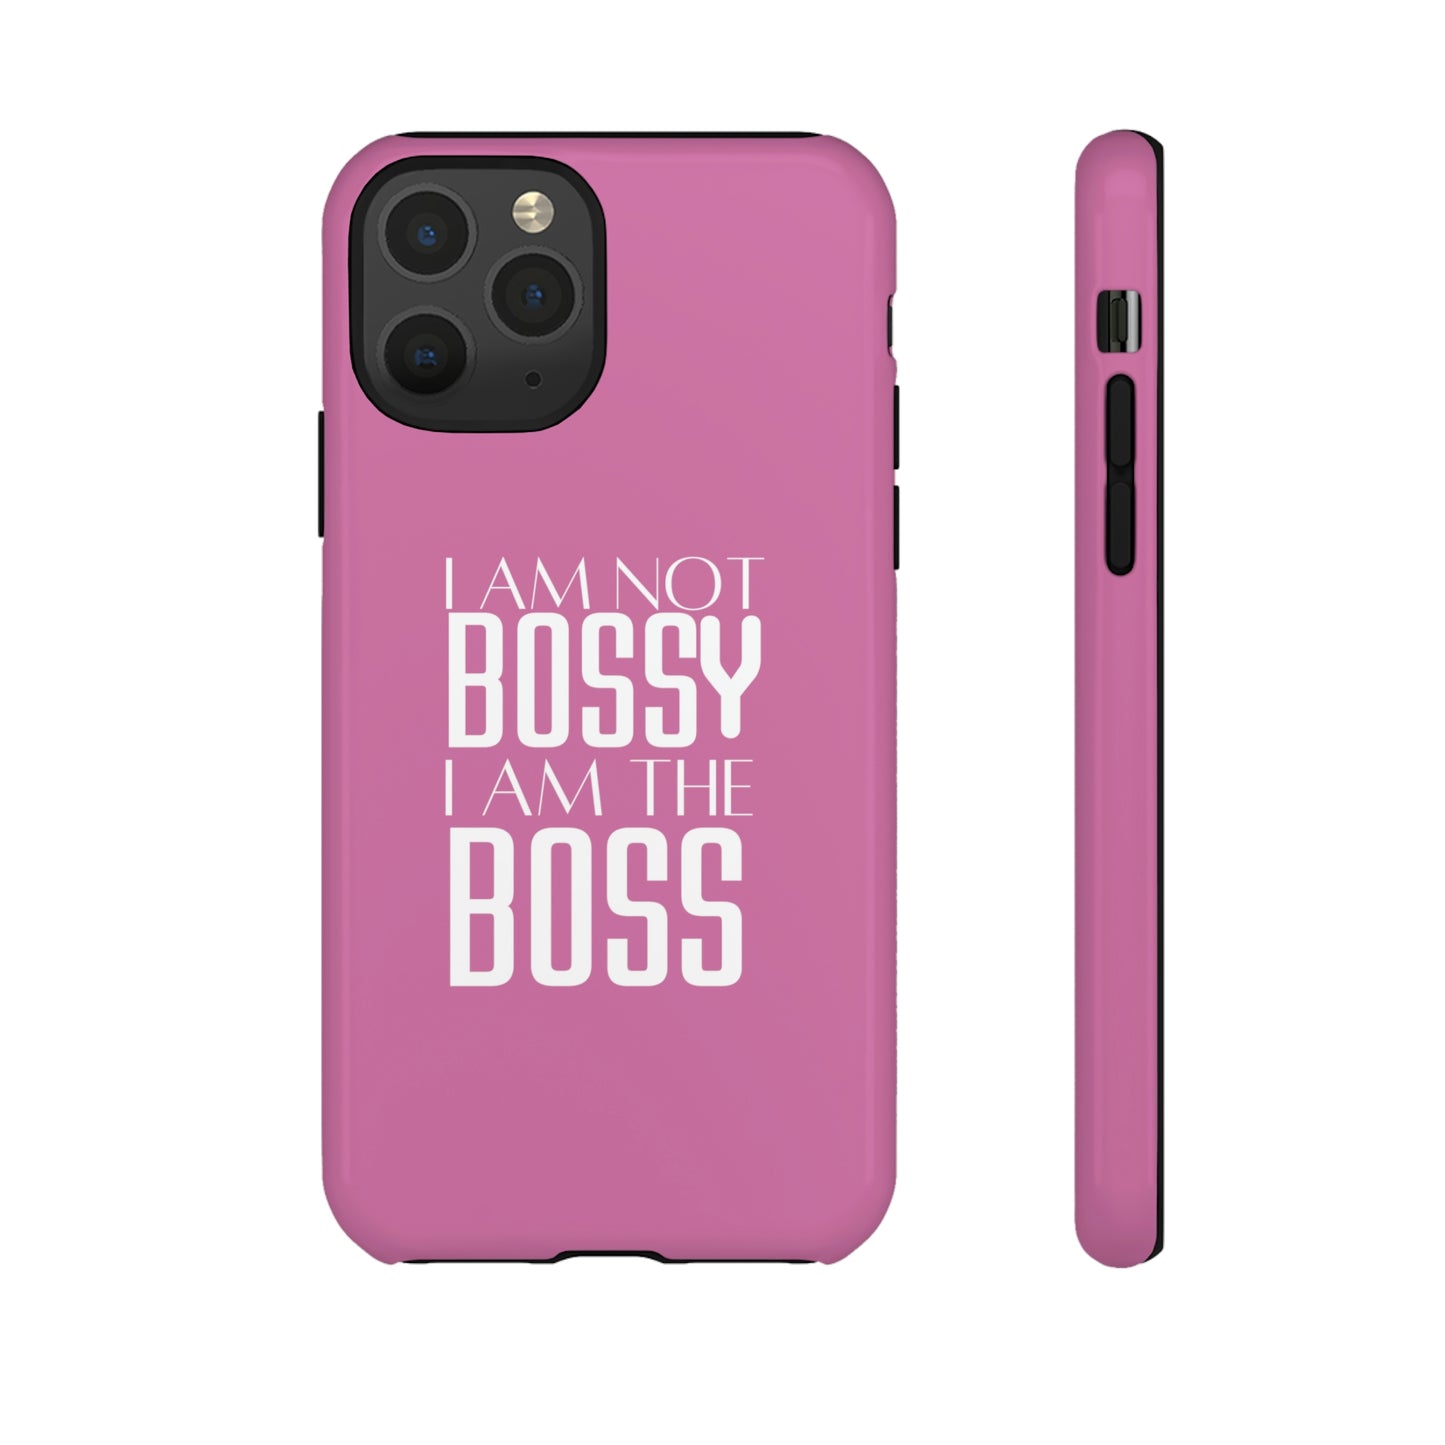 Inspire Empire || Tough Cases || I am not bossy, I am the Boss